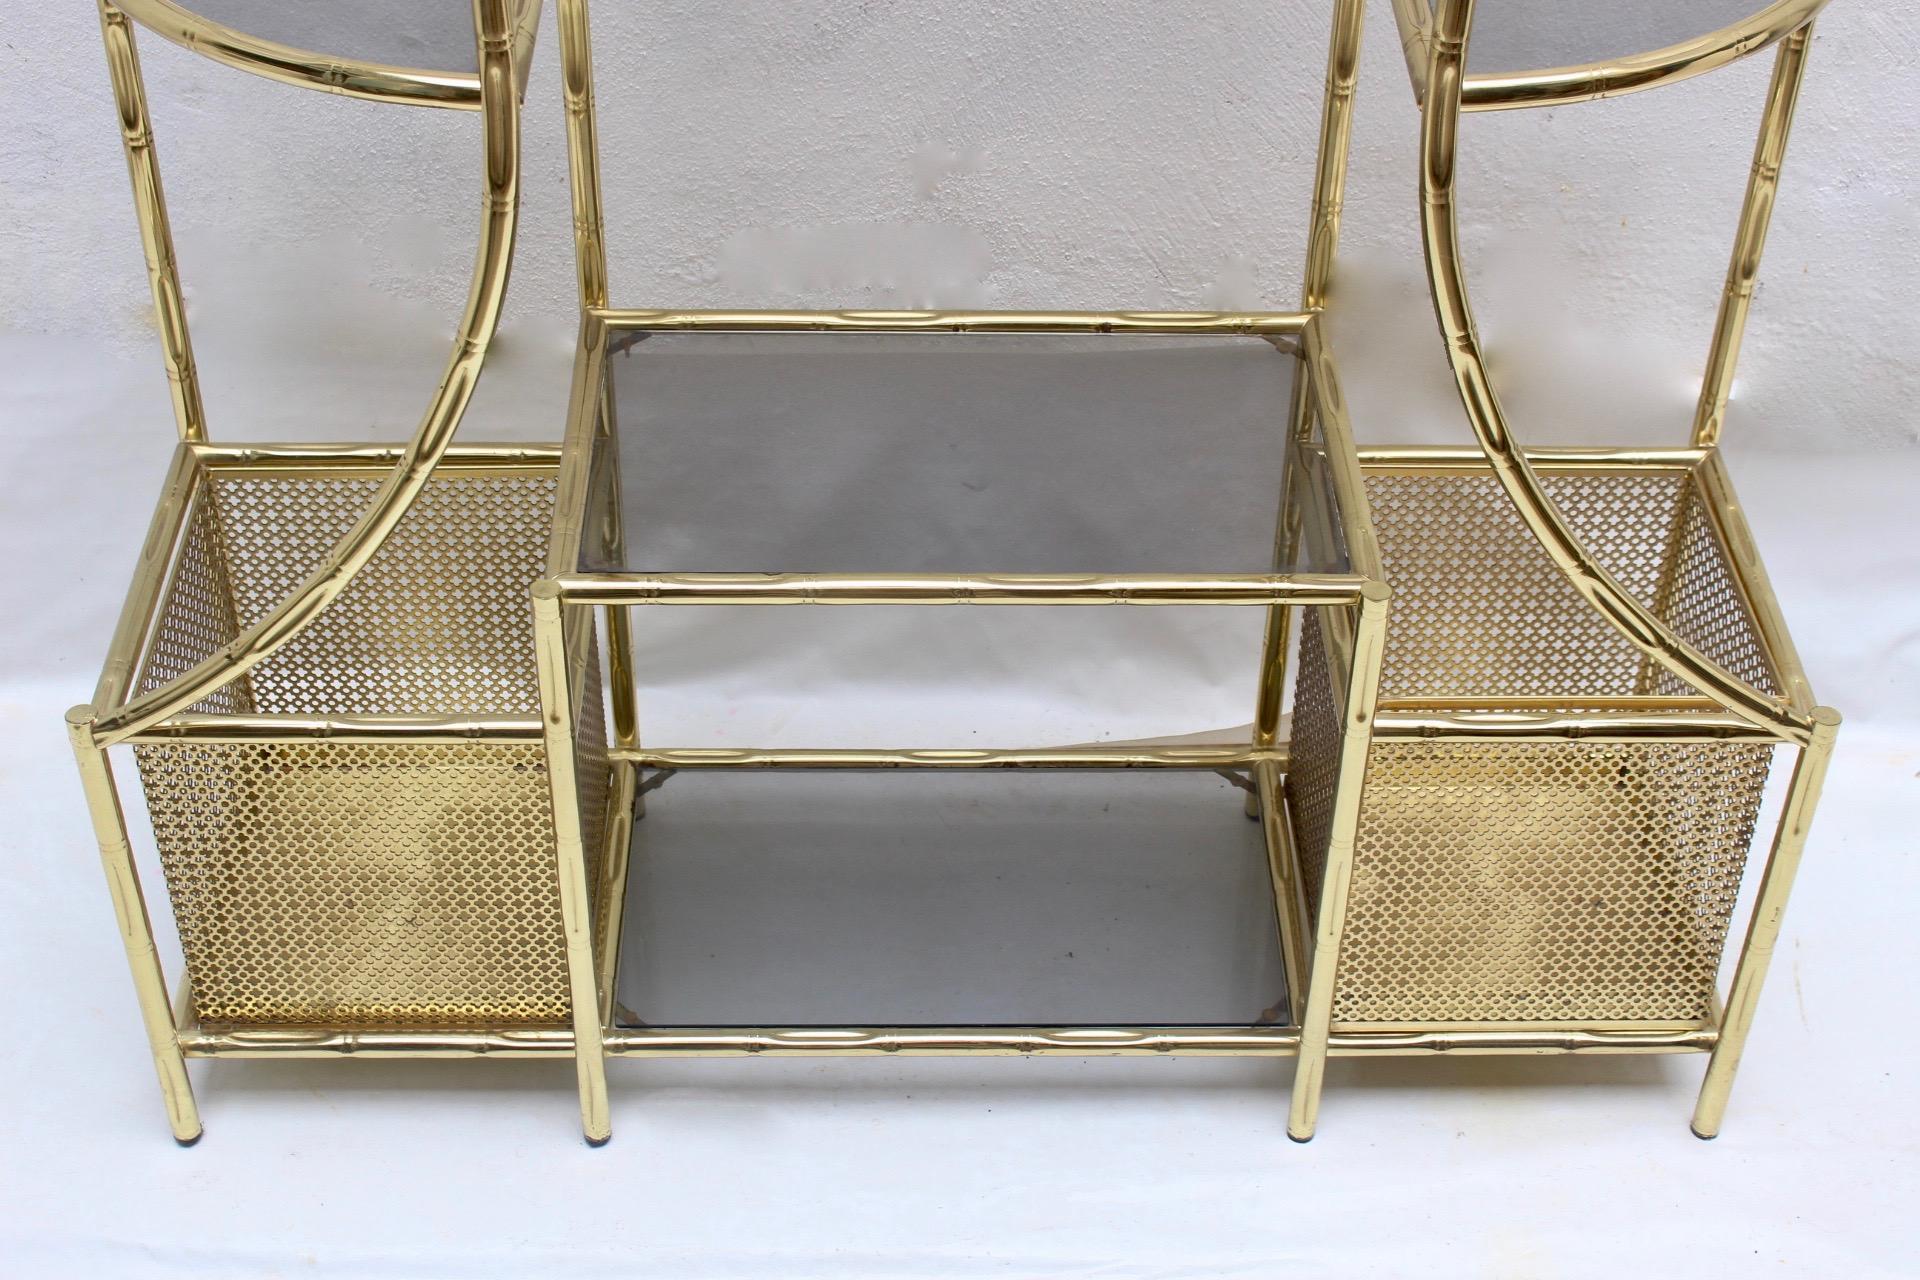 Midcentury Faux Bamboo Iron and Glass Étagère, Spain, 1970s In Good Condition For Sale In Valencia, Valencia